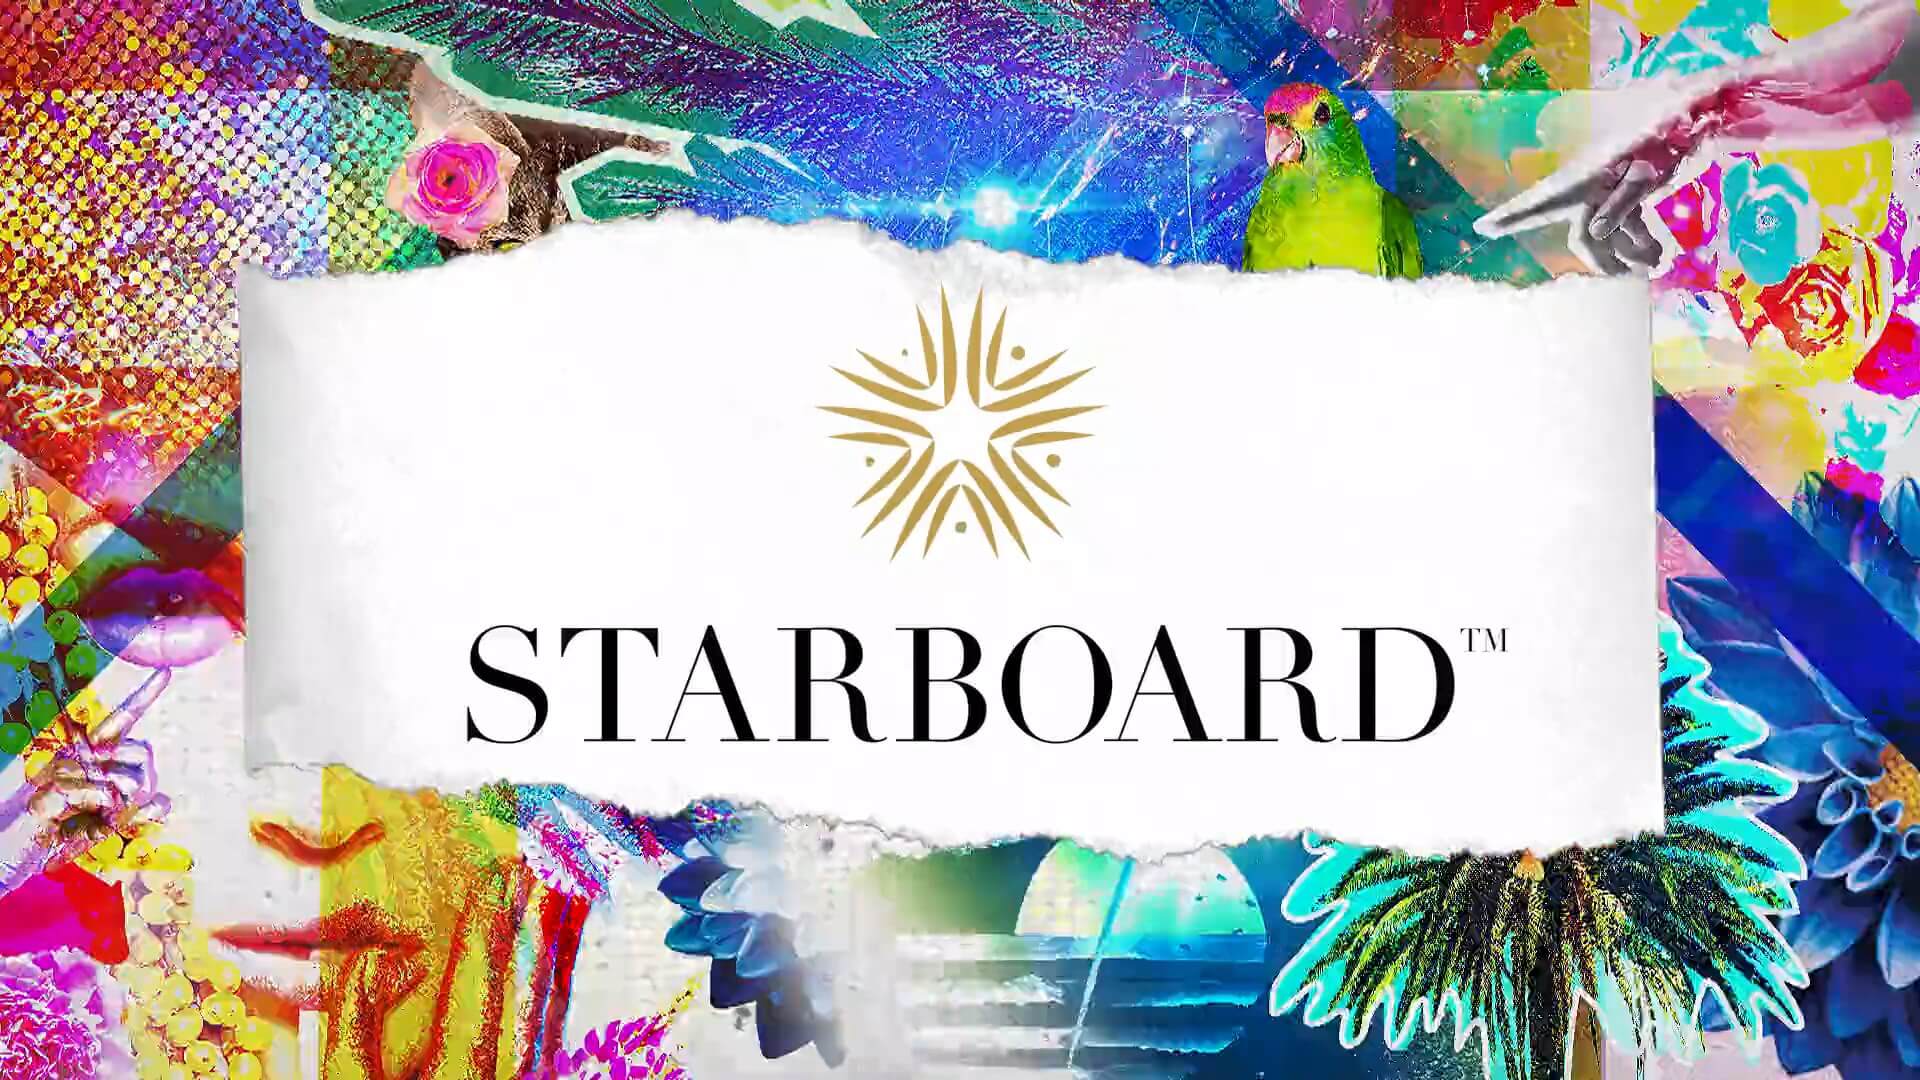 Starboard Cruise Services - Starboard will be recognized as the